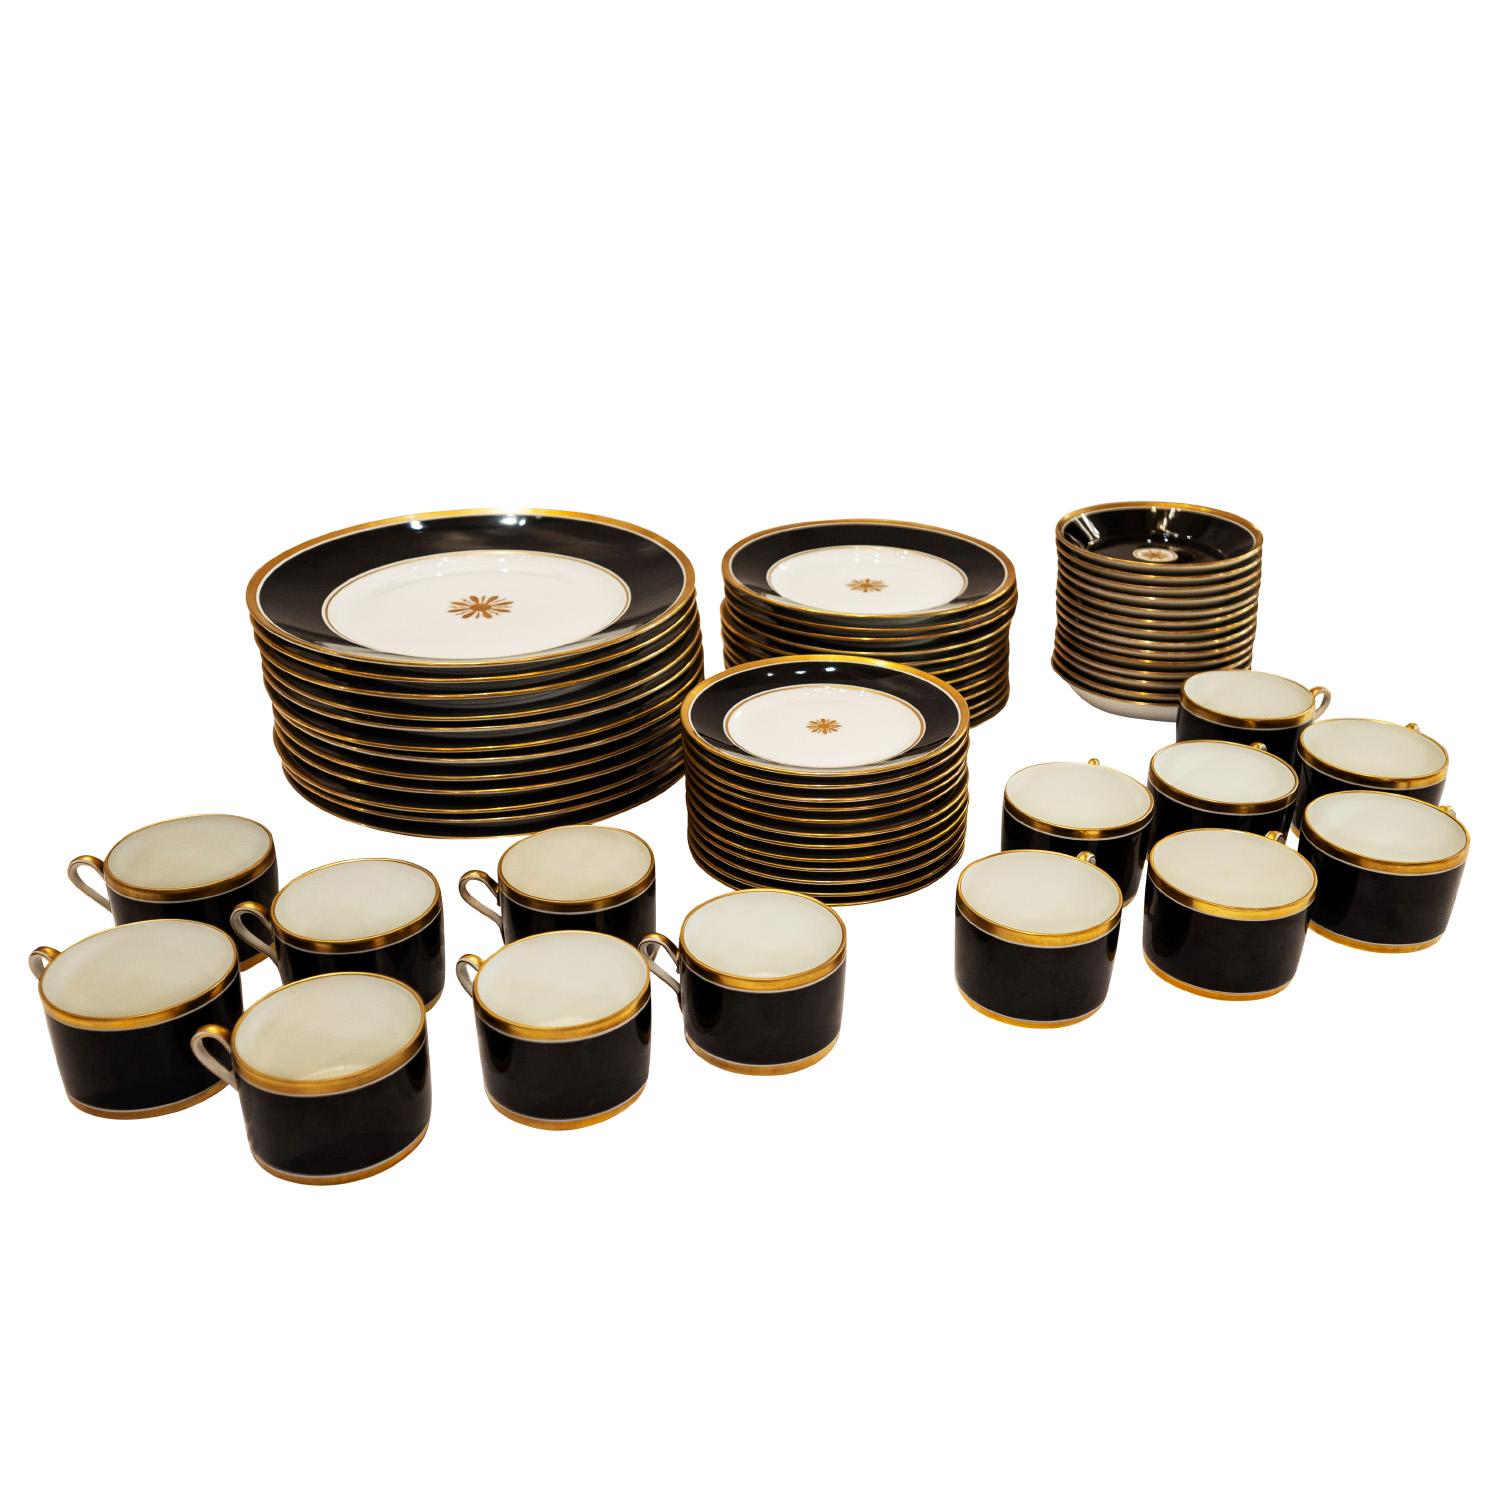 Rare refined and visually stunning 64 piece set of service ware, fine porcelain in white, black and gold by Richard Ginori, Italy 1950's (signed).  The black and gold set together are extremely rich and luxurious.  There are no chips or cracks. 